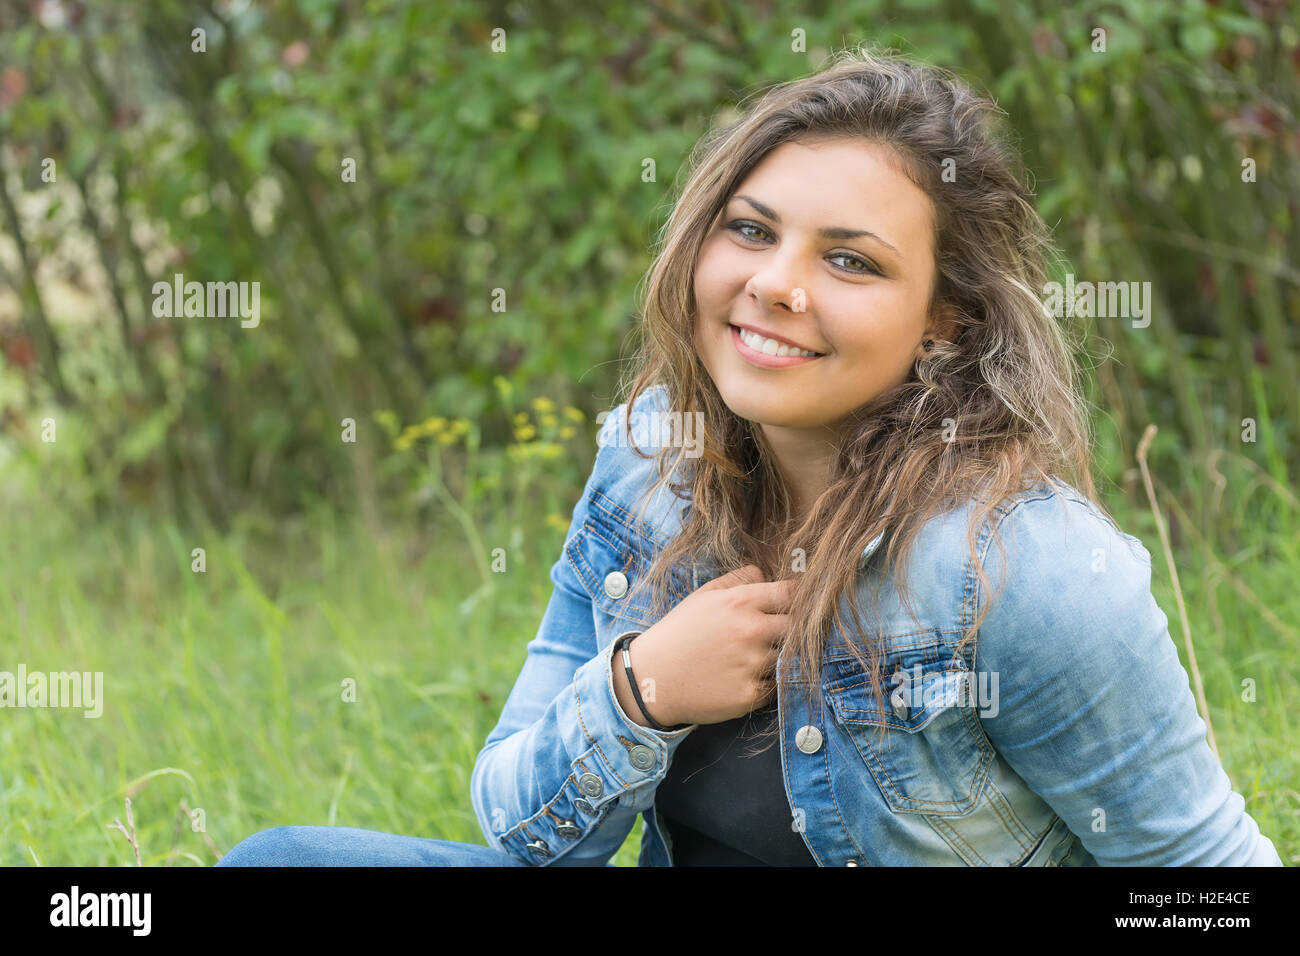 Portrait of laughing head tilted back teenage girl sitting outdoors. Girl is looking at the camera. Stock Photo